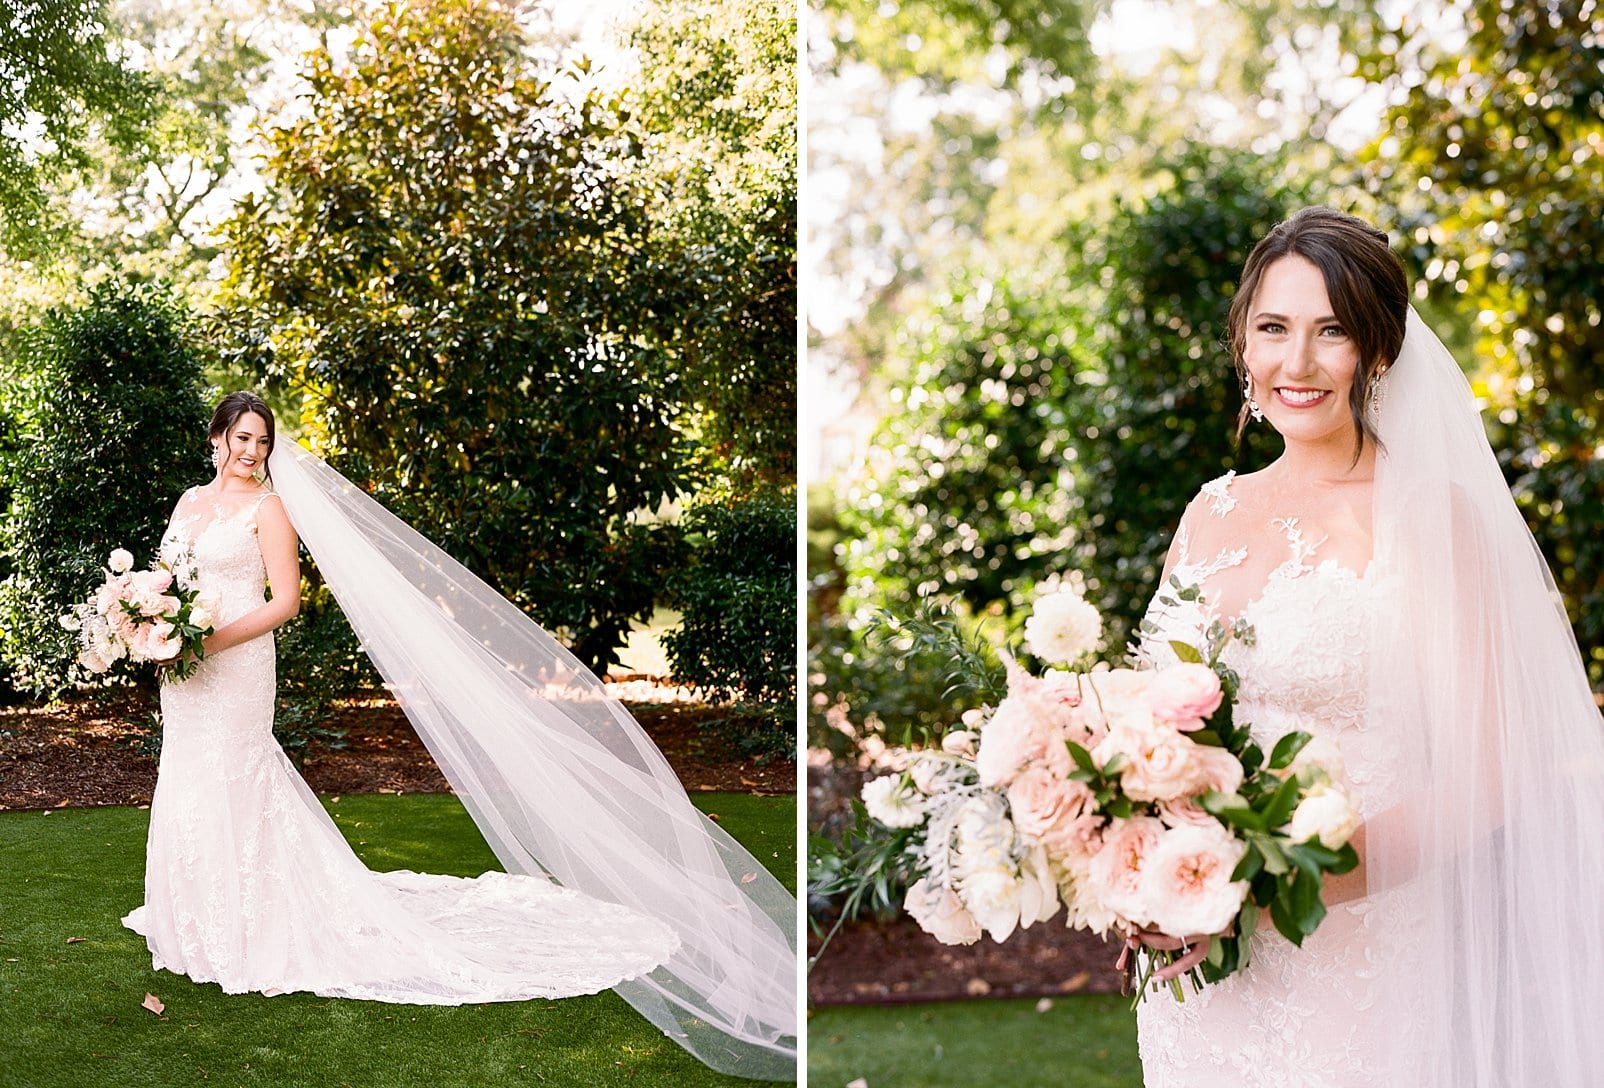 Merrimon Wynne bridal portraits with her veil blowing behind her photo